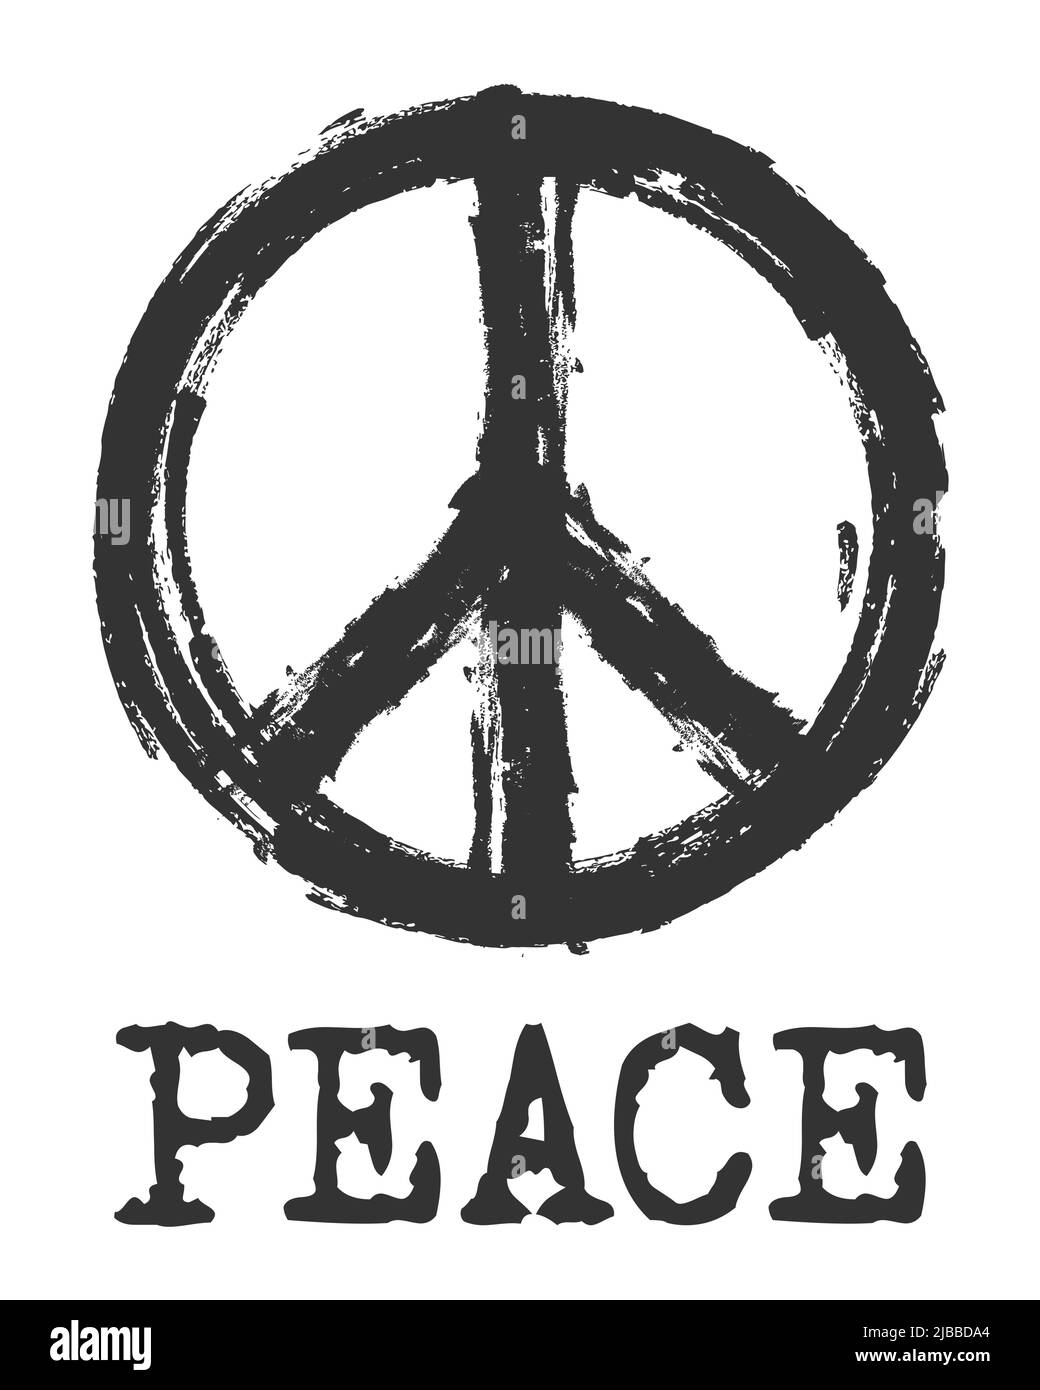 Peace symbol . Realistic hand drawn by chalk texture style . The Campaign for Nuclear Disarmament ( CND ) Sign . Flat design . Peaceful and hippie pac Stock Vector